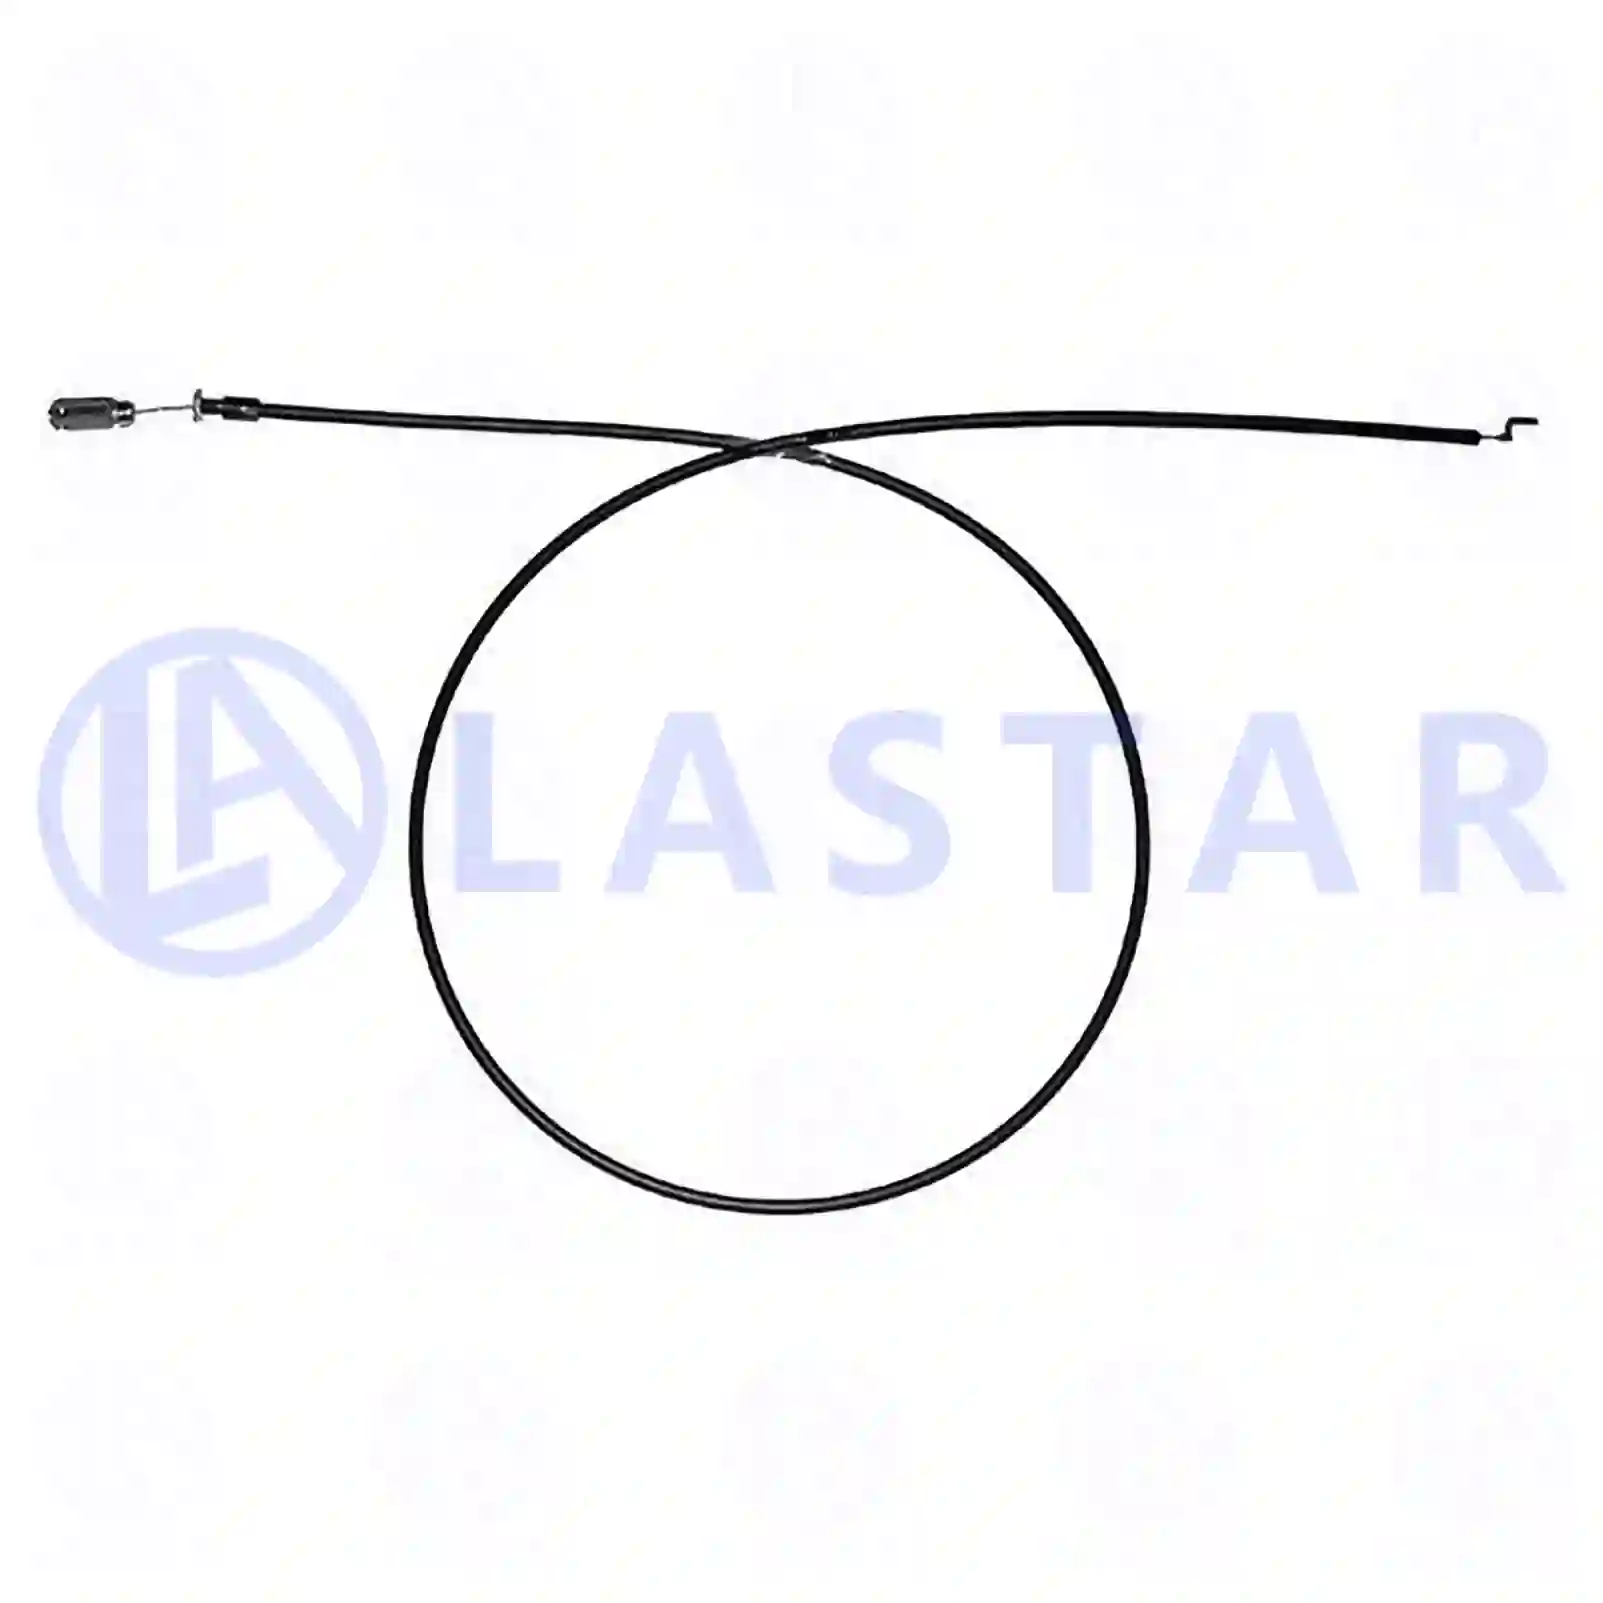 Control wire, front flap, 77721584, 1391363, ZG60423-0008 ||  77721584 Lastar Spare Part | Truck Spare Parts, Auotomotive Spare Parts Control wire, front flap, 77721584, 1391363, ZG60423-0008 ||  77721584 Lastar Spare Part | Truck Spare Parts, Auotomotive Spare Parts